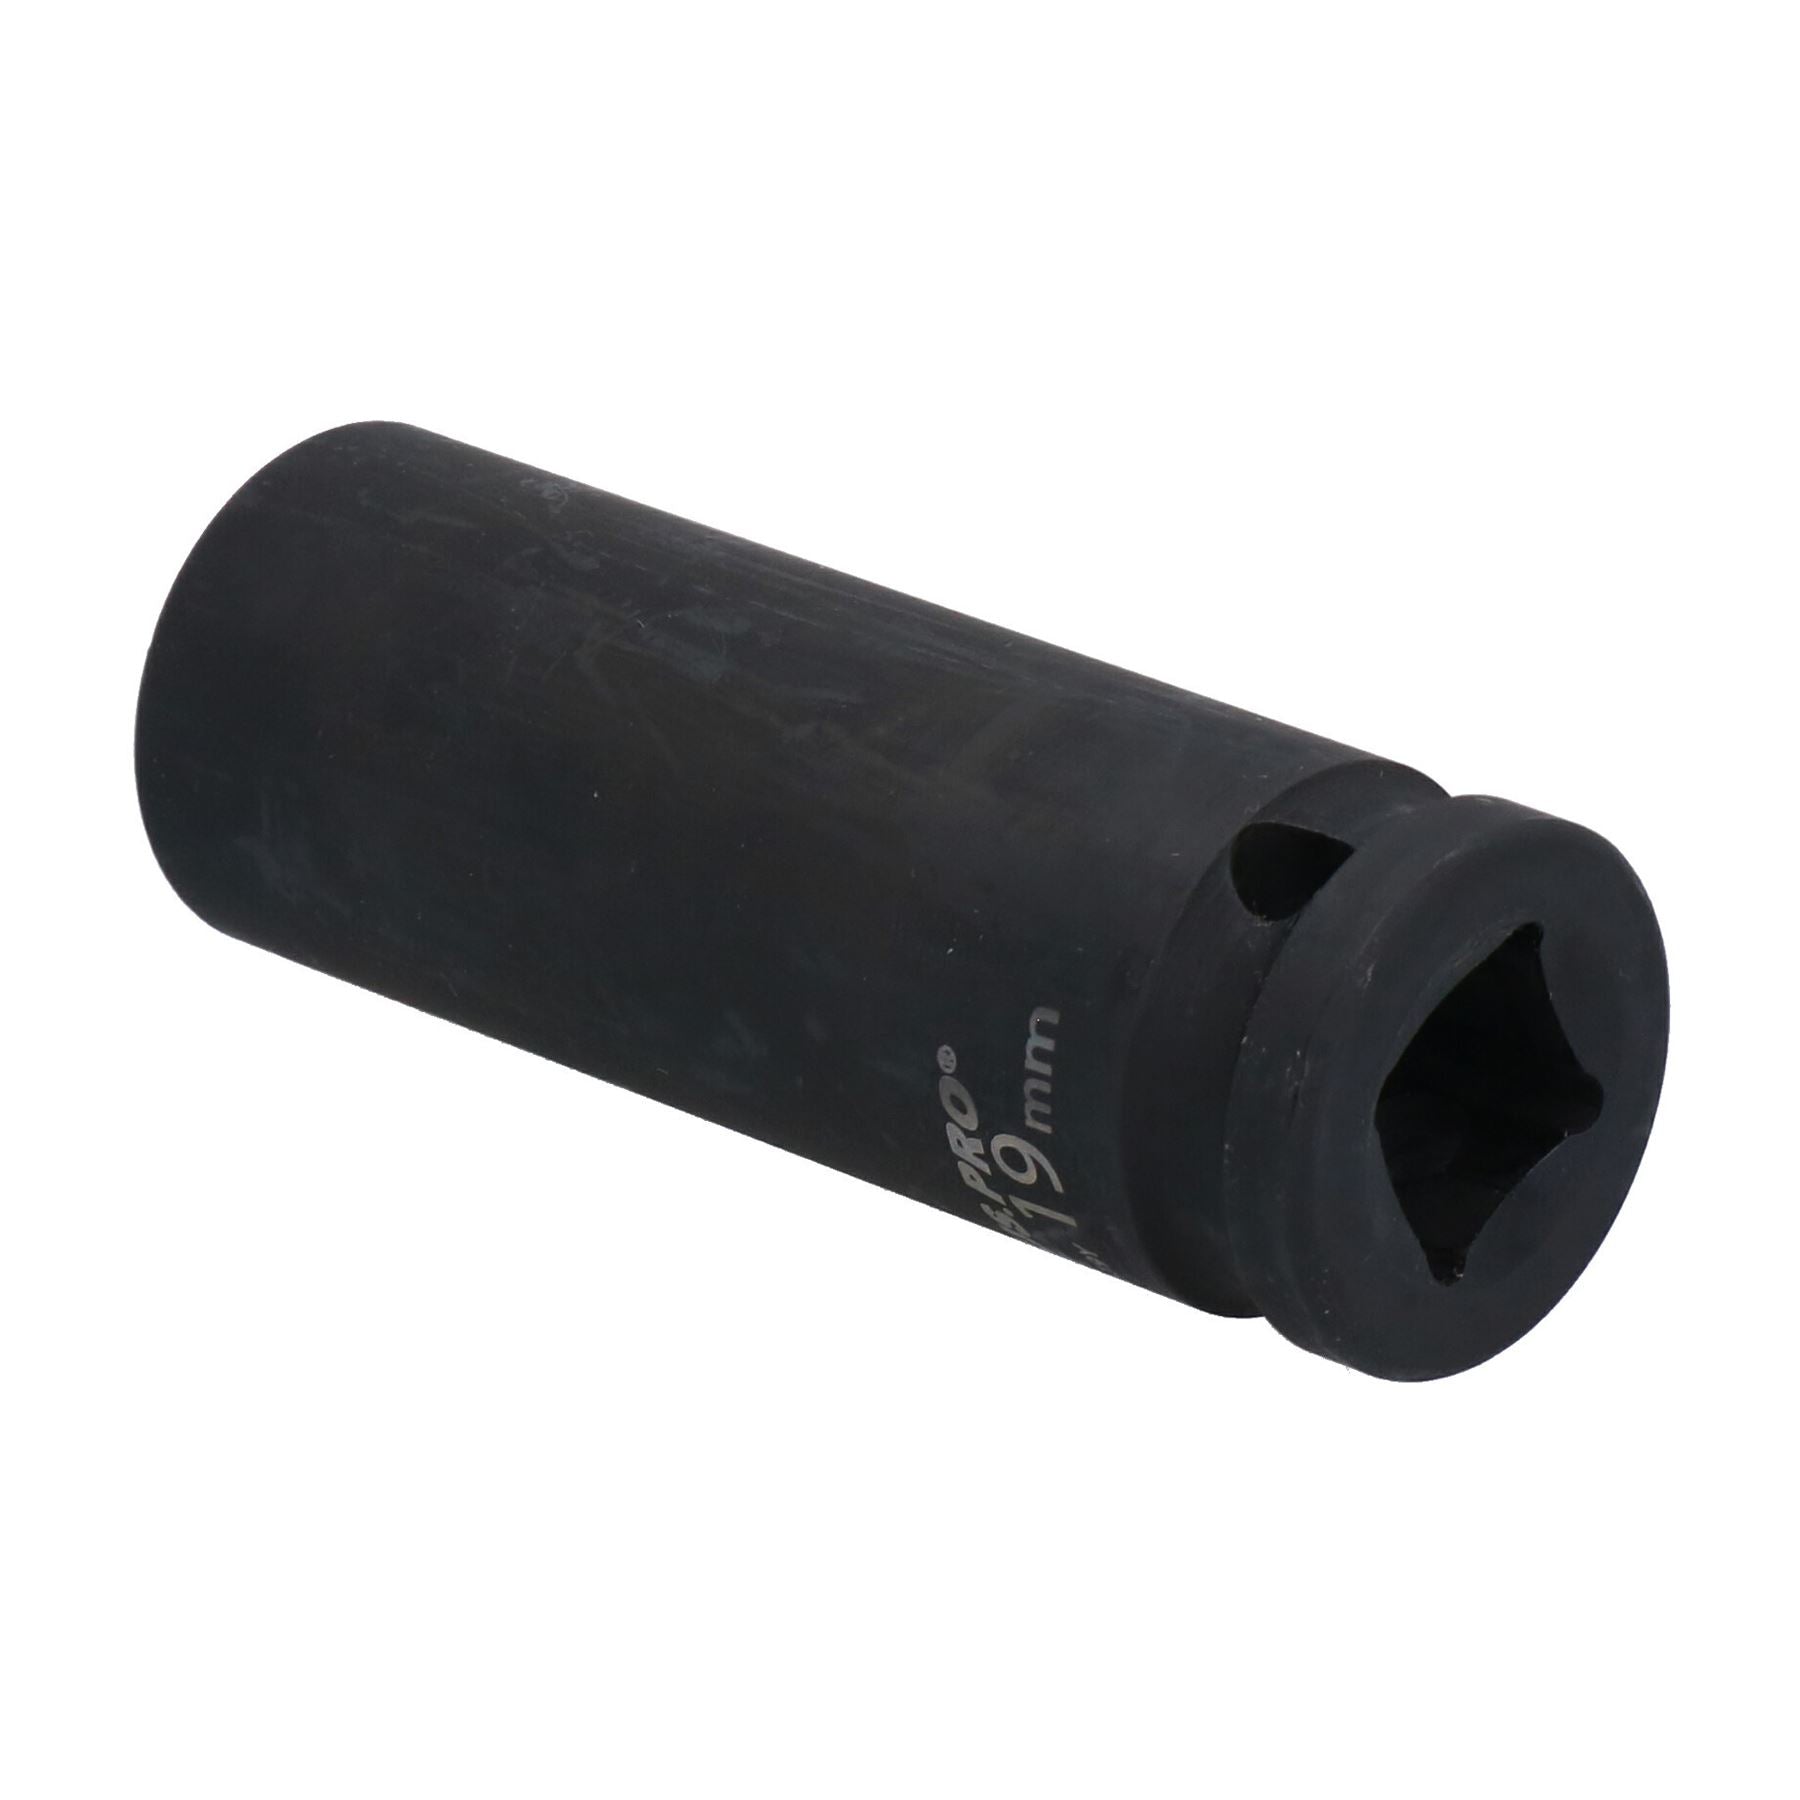 19mm 1/2" Drive Double Deep Metric Impacted Impact Socket Single Hex 6 Sided